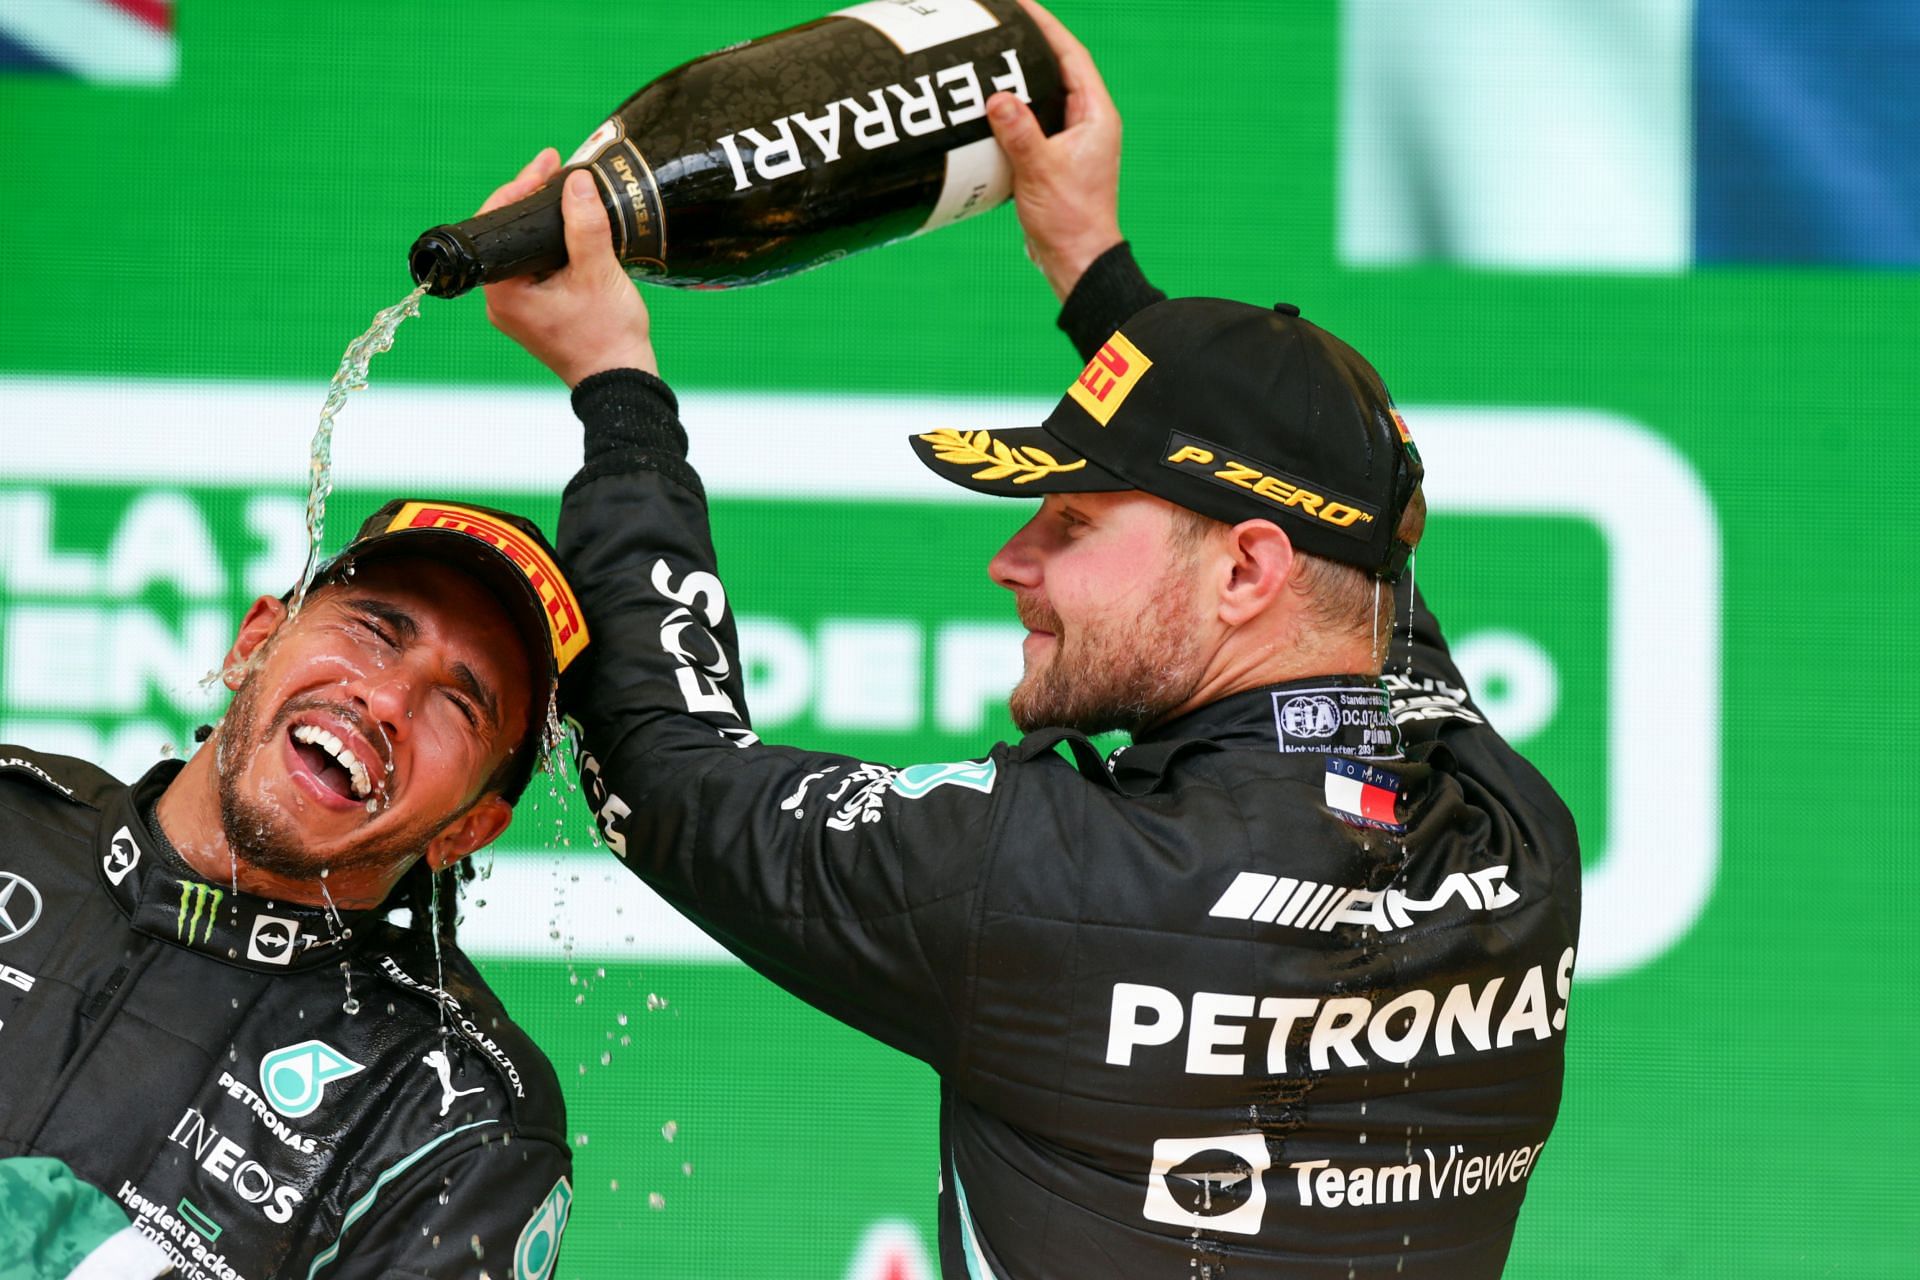 Lewis Hamilton (left) and Valterri Bottas (right) celebrate finishing in first and third positions at the Brazil Grand Prix (Photo by Peter Fox/Getty Images)